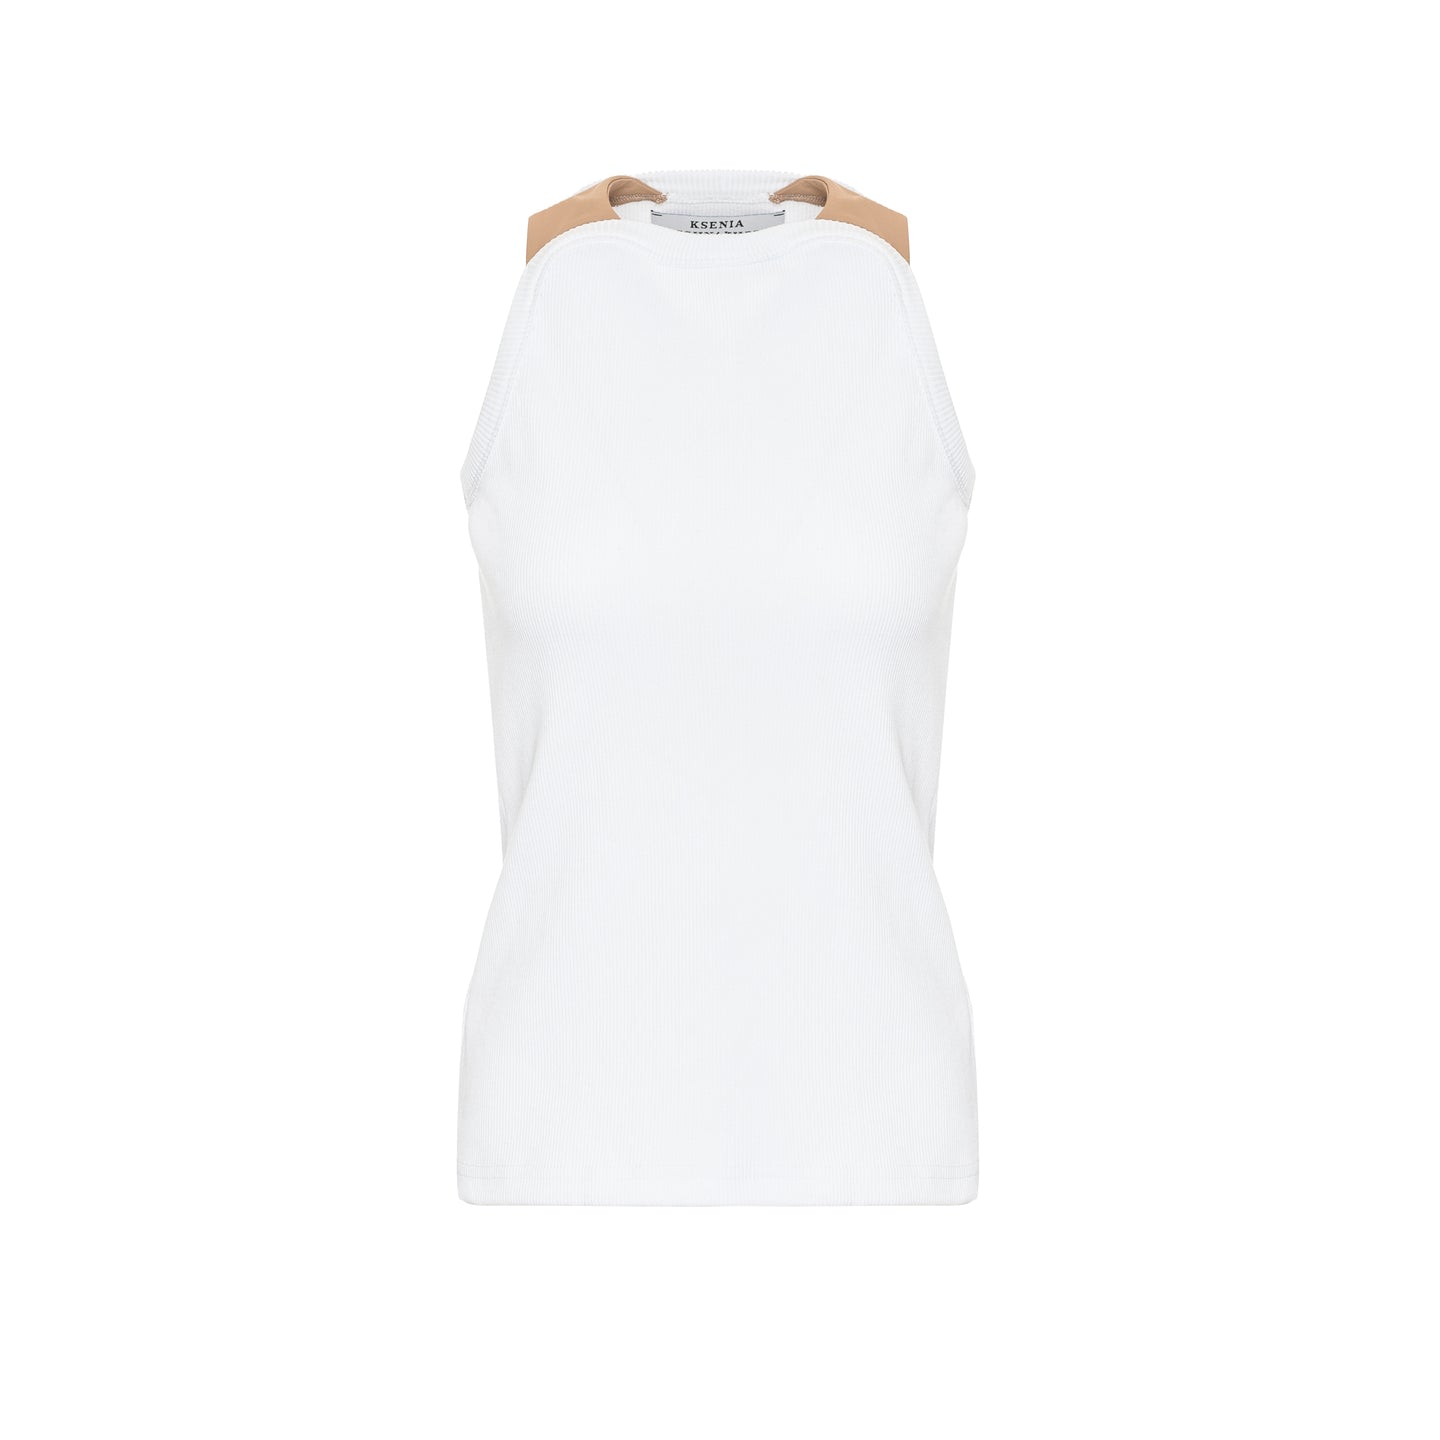 White Top with Beige Trims image